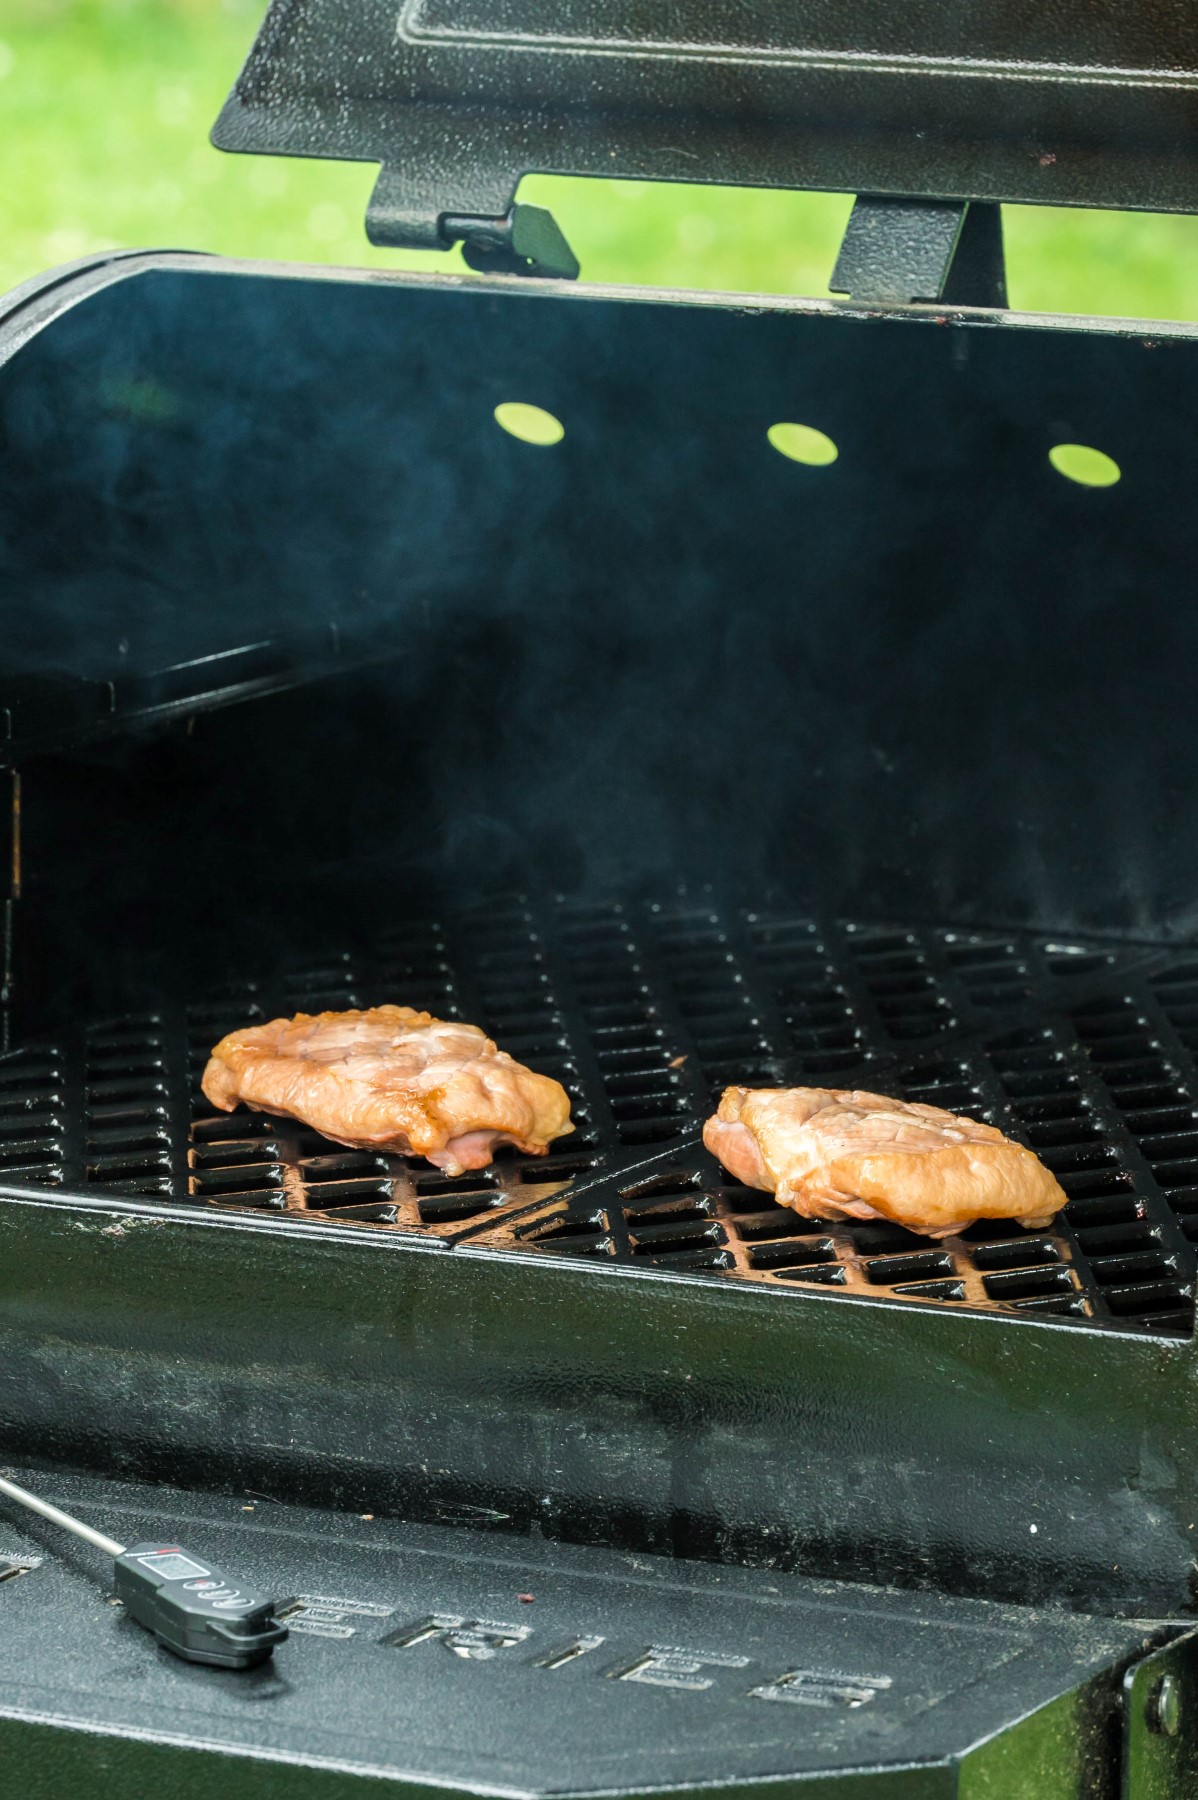 A pair of duck breasts smoking on the smoker grill.